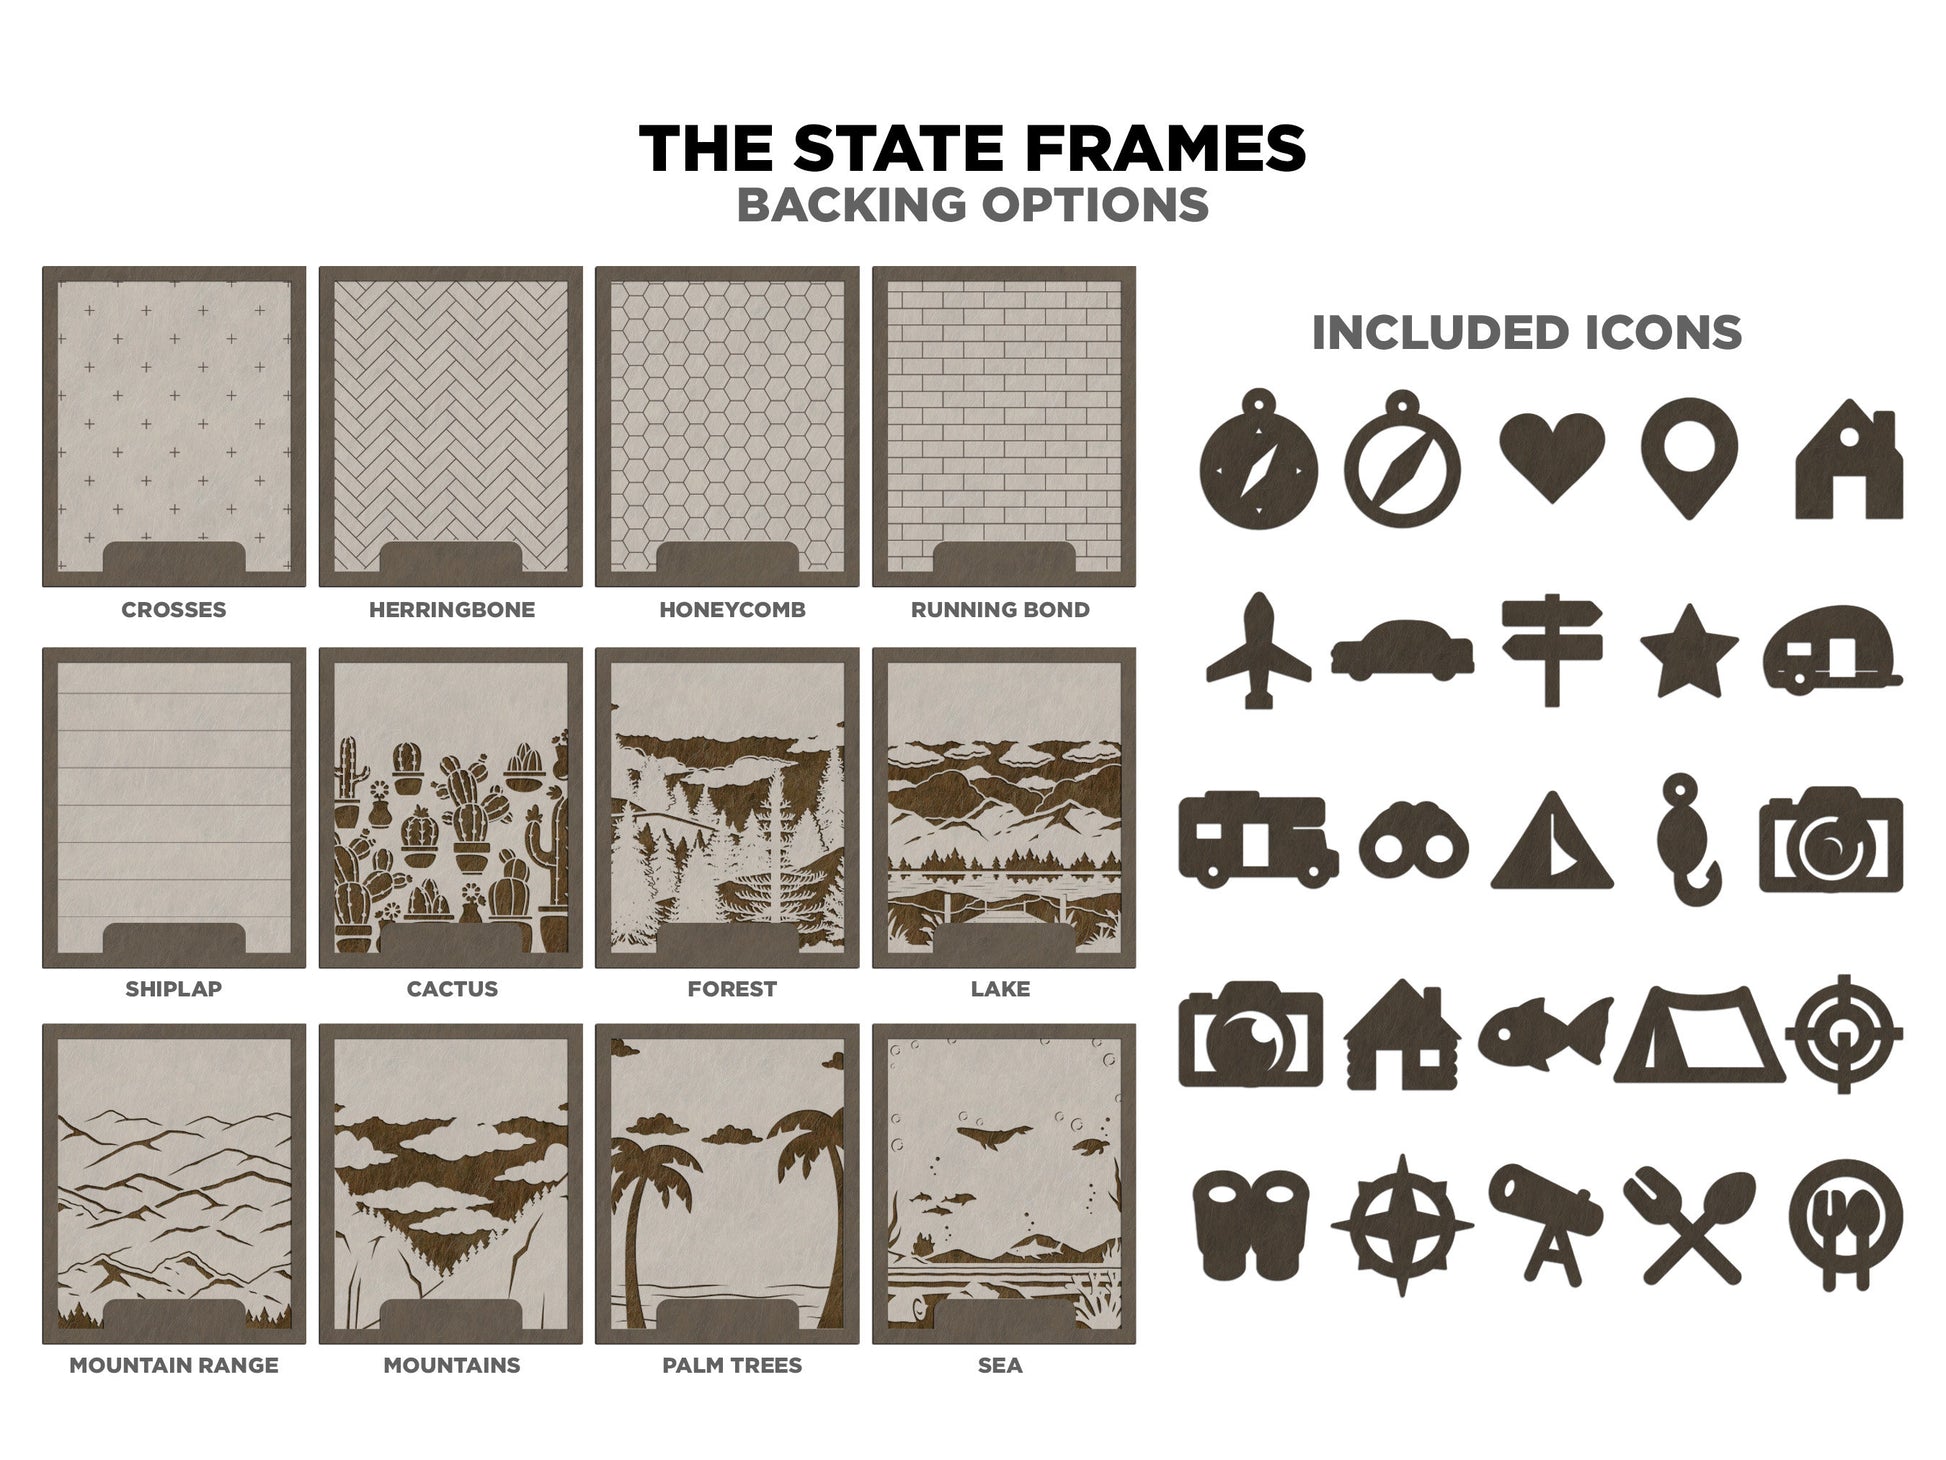 The Nebraska State Frame - 13 text options, 12 backgrounds, 25 icons Included - Make over 7,500 designs - Glowforge & Lightburn Tested